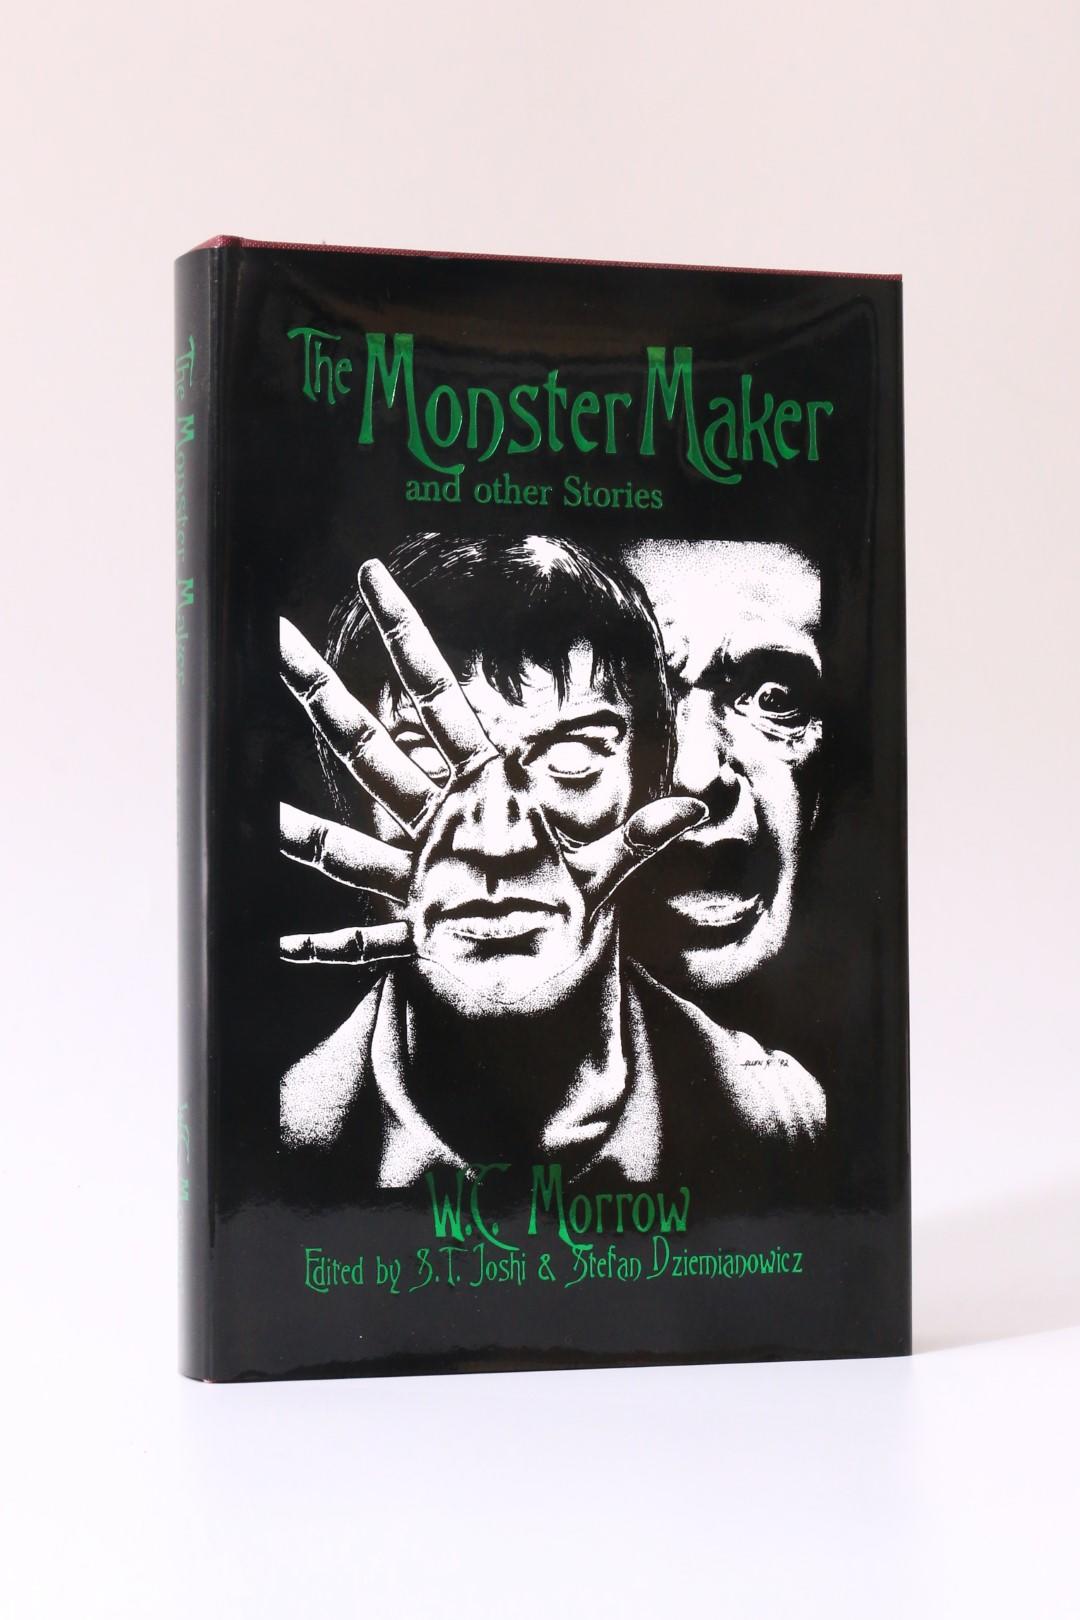 W.C. Morrow - The Monster Maker and Other Stories - Midnight House, 2000, First Edition.